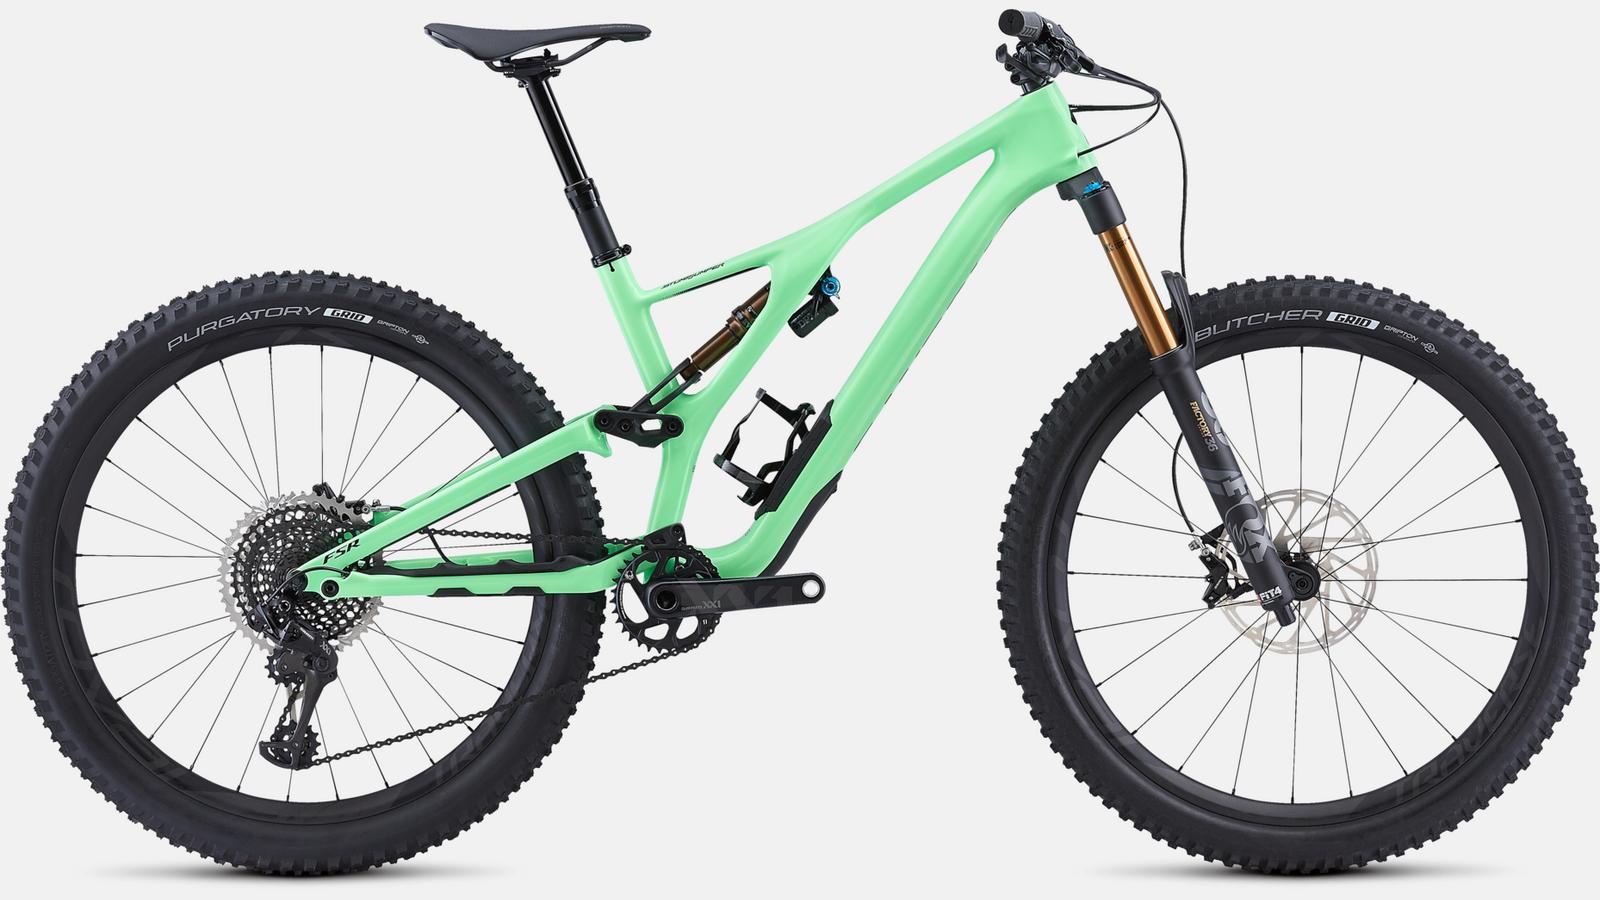 Paint for 2019 Specialized S-Works Stumpjumper 27.5 - Gloss Acid Kiwi